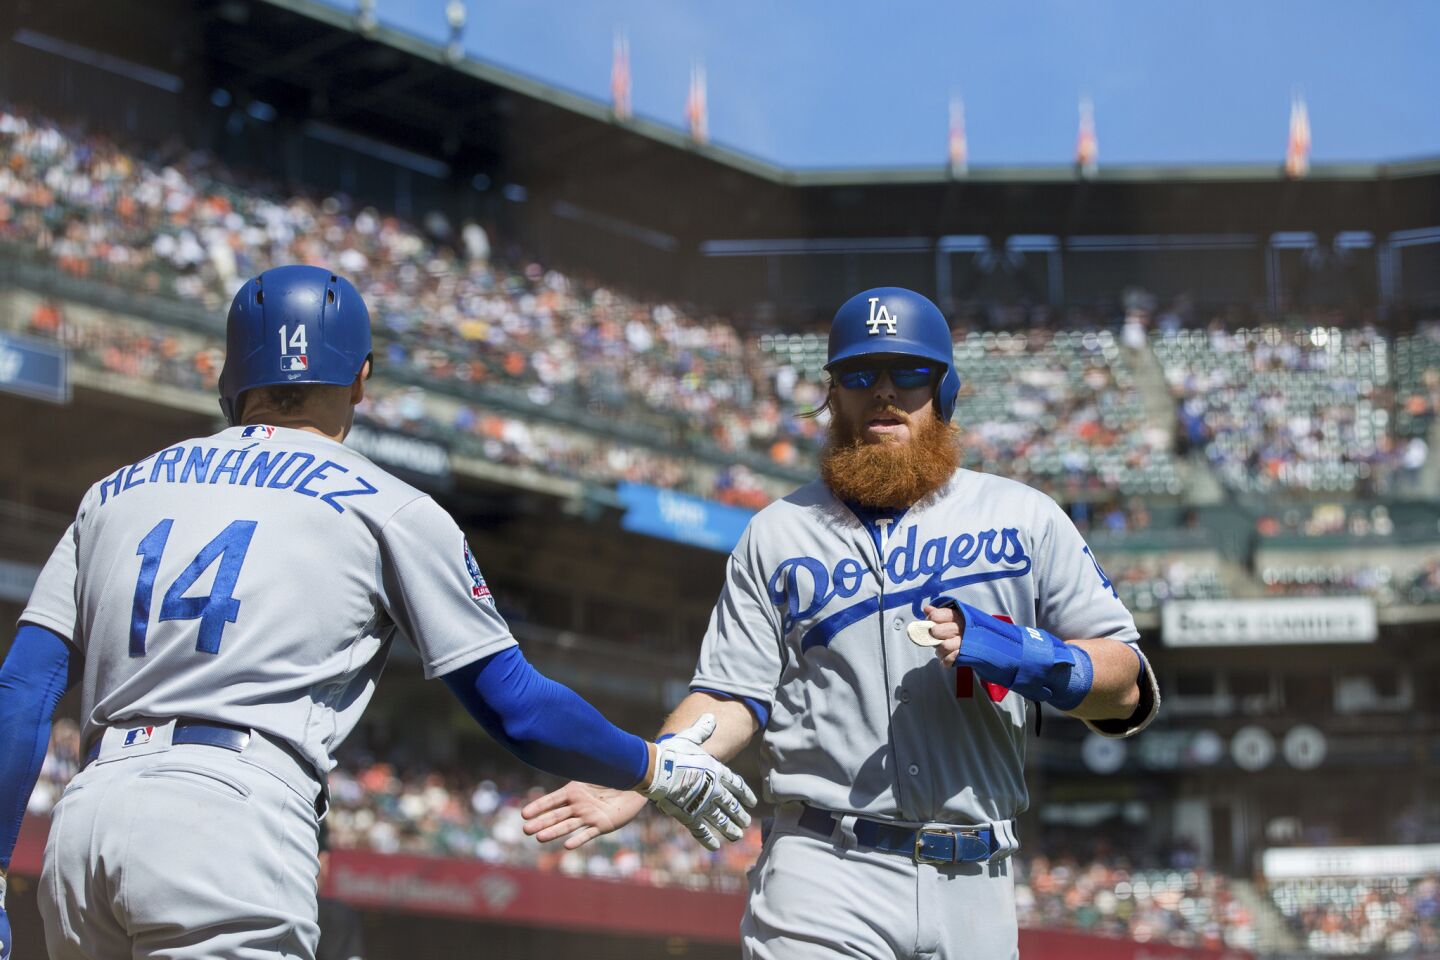 Los Angeles Dodgers Justin Turner, right, celebrates with Enrique Hernandez after scoring a run against the San Francisco Giants in the third inning of a baseball game in San Francisco, Sunday, Sept. 30, 2018. (AP Photo/John Hefti)